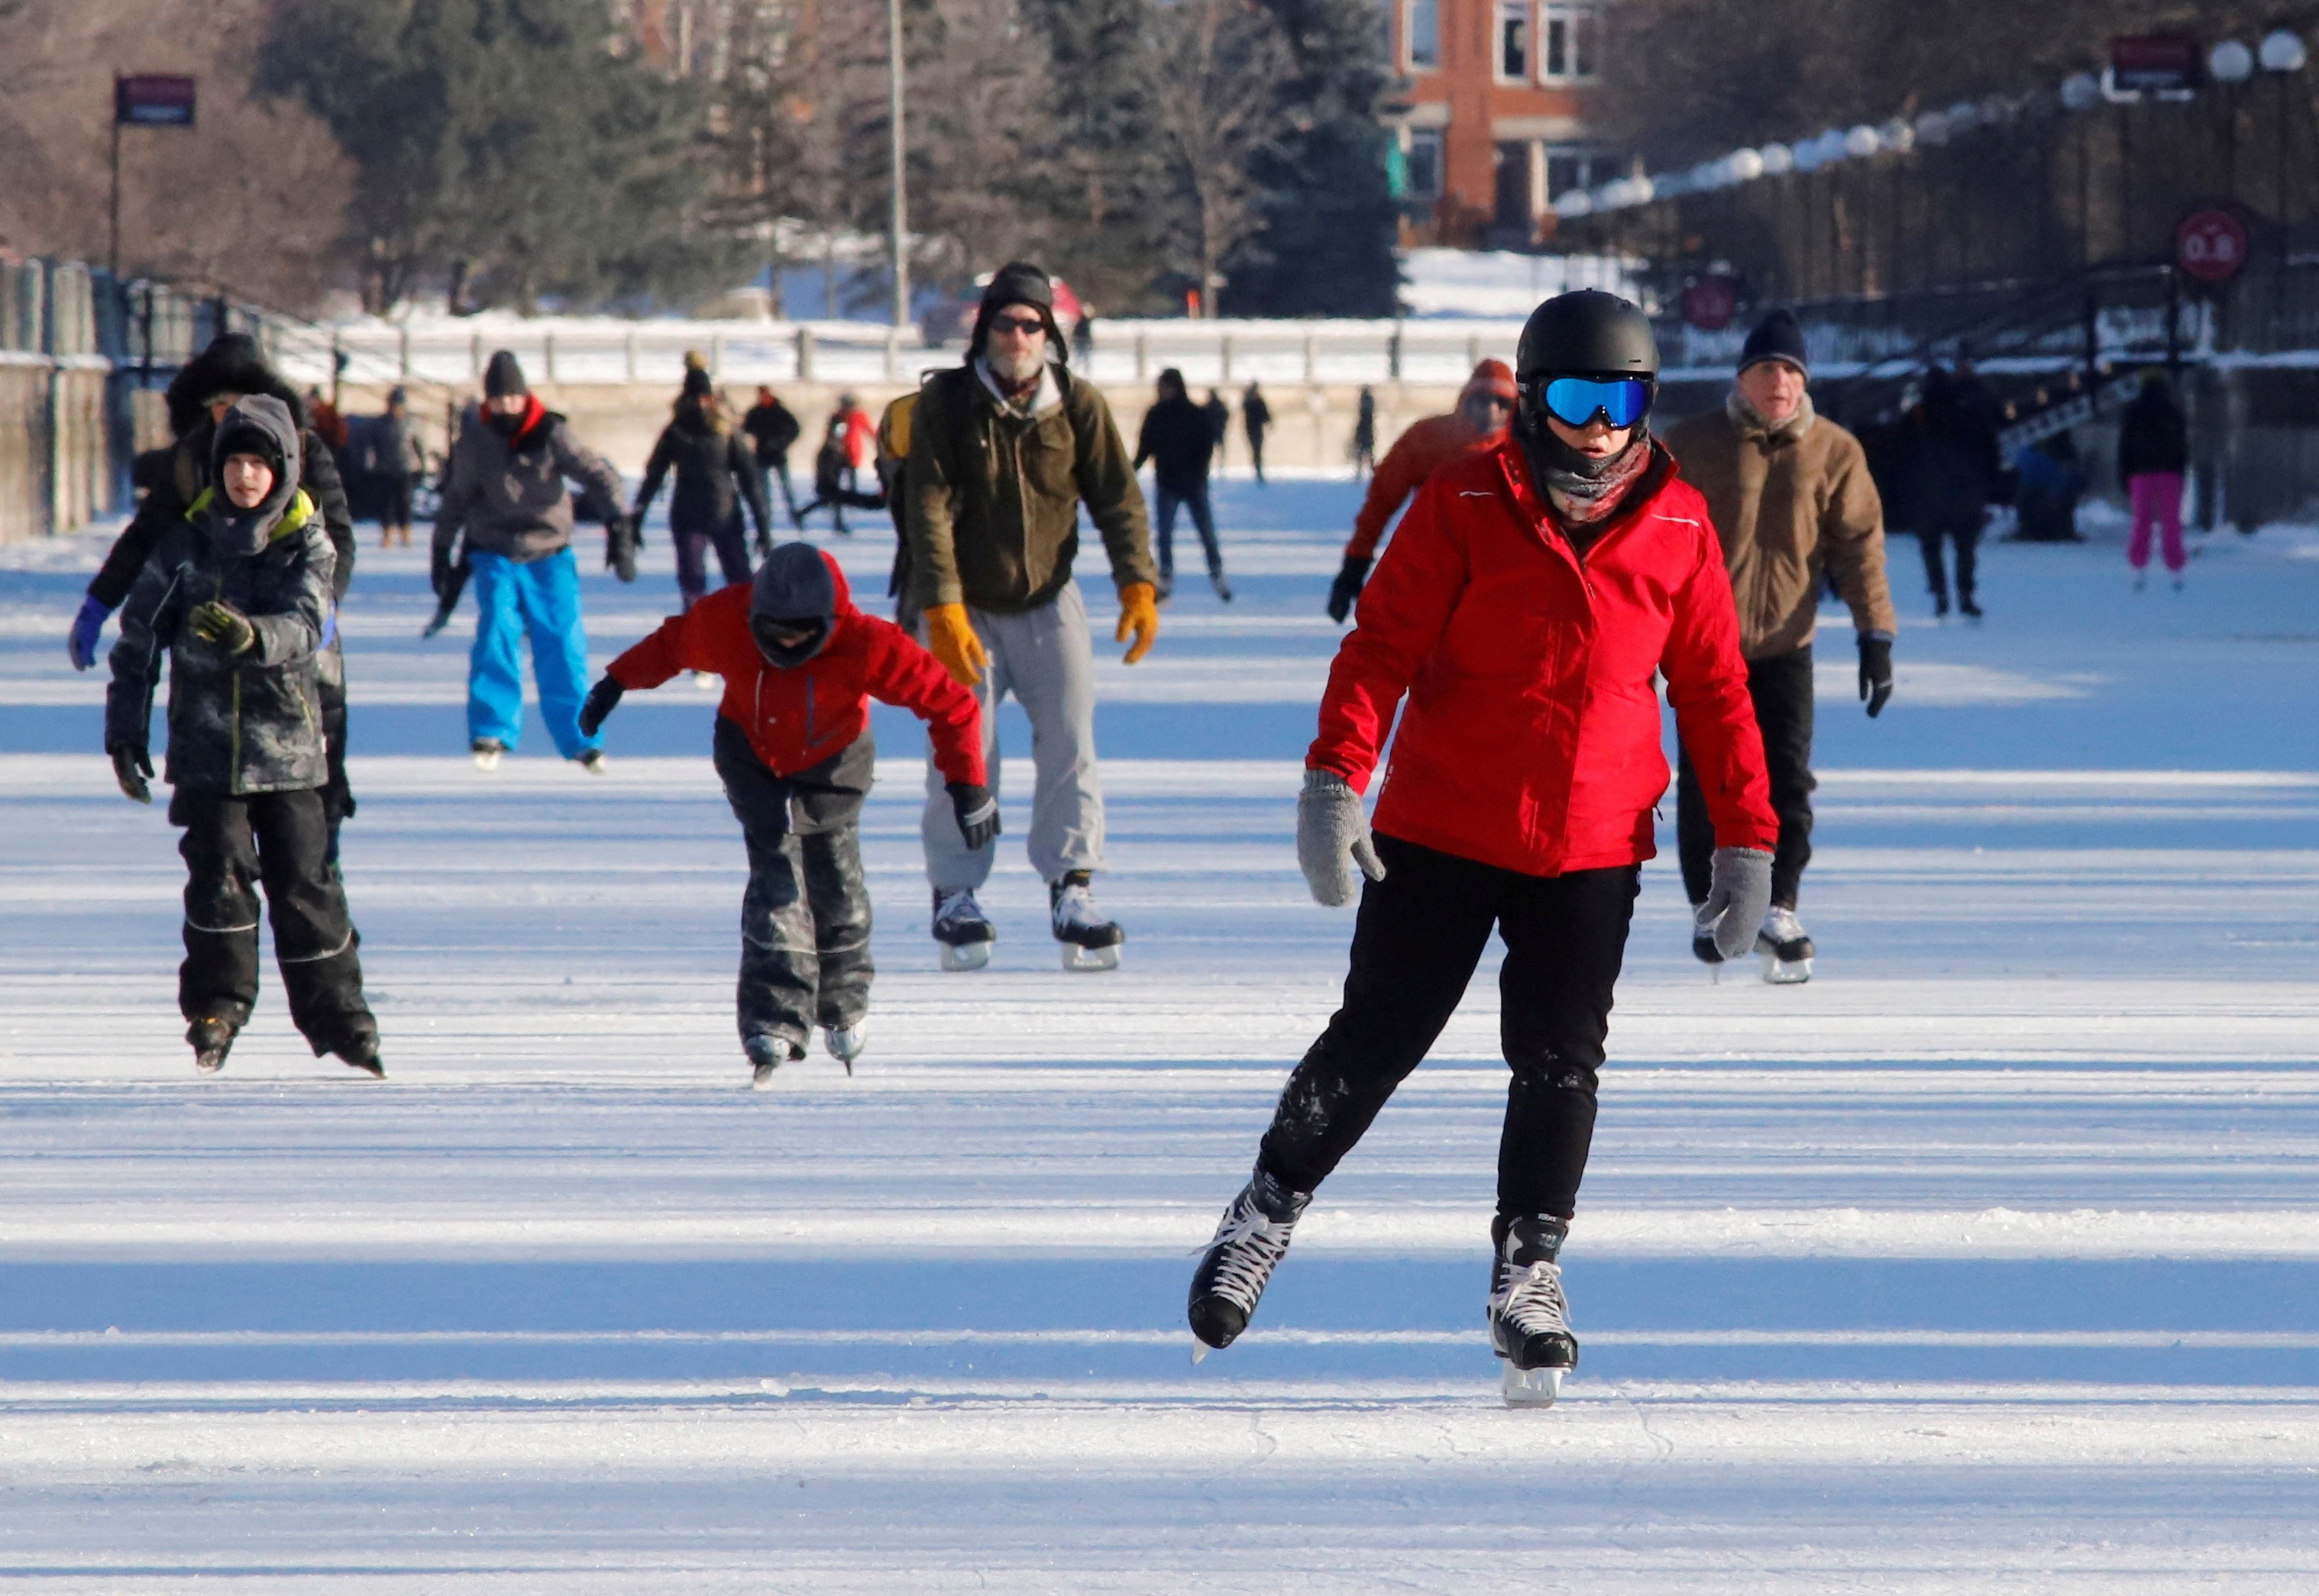 People skate on the Rideau Canal Skateway, the world's largest skating rink, during a period of subzero Arctic weather in Ottawa, Ontario, Canada January 14, 2022. Photo: Reuters